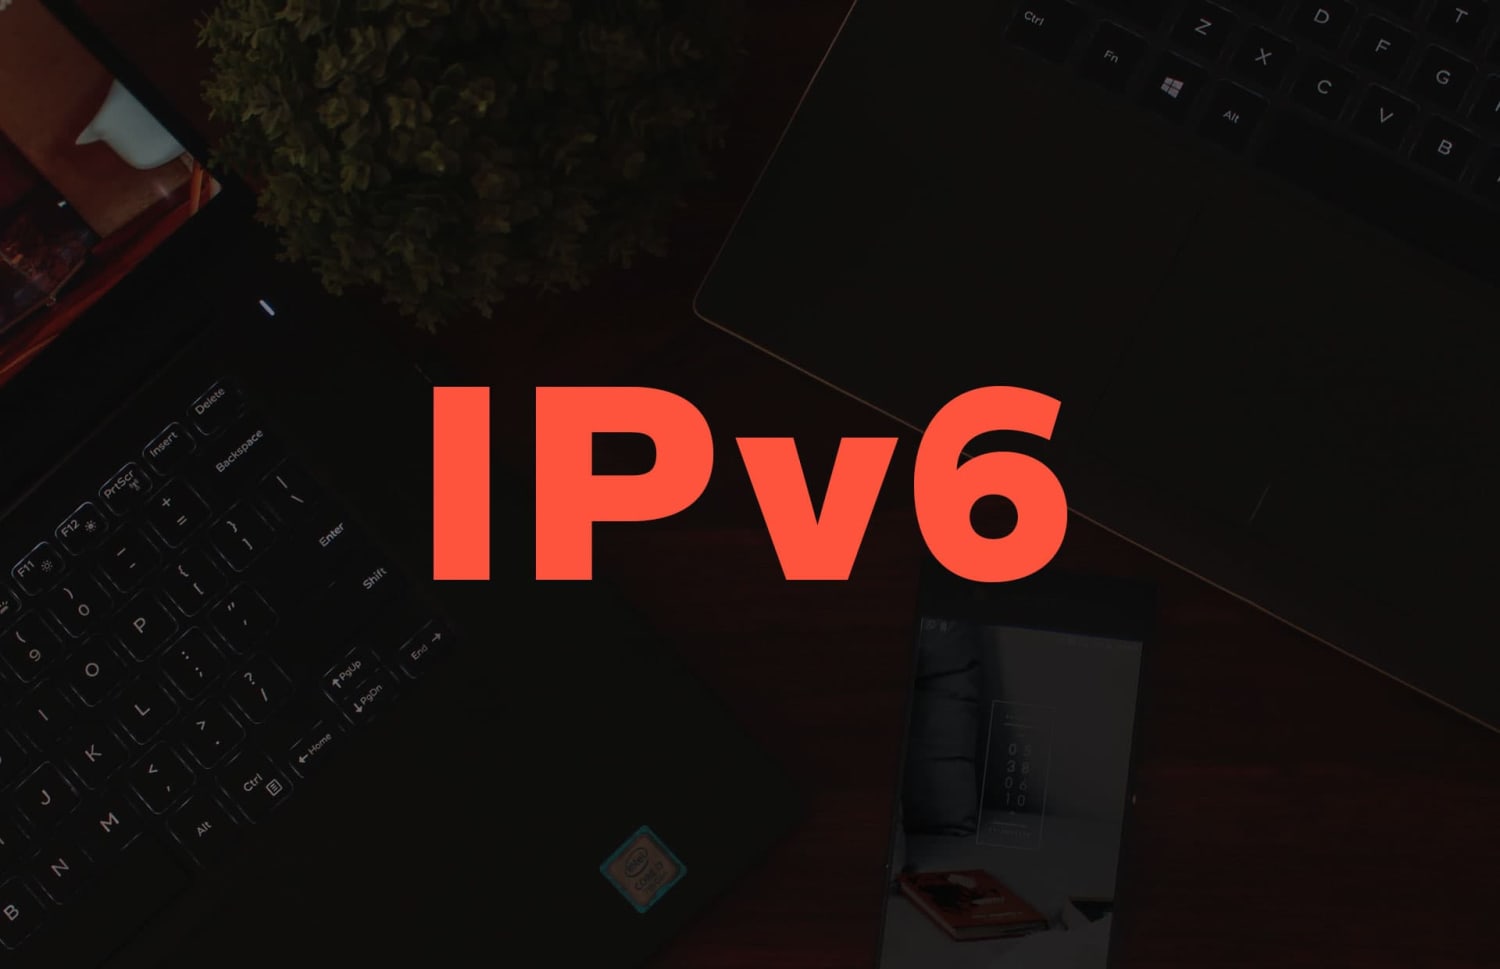 Design and Concept of IPv6 addresses